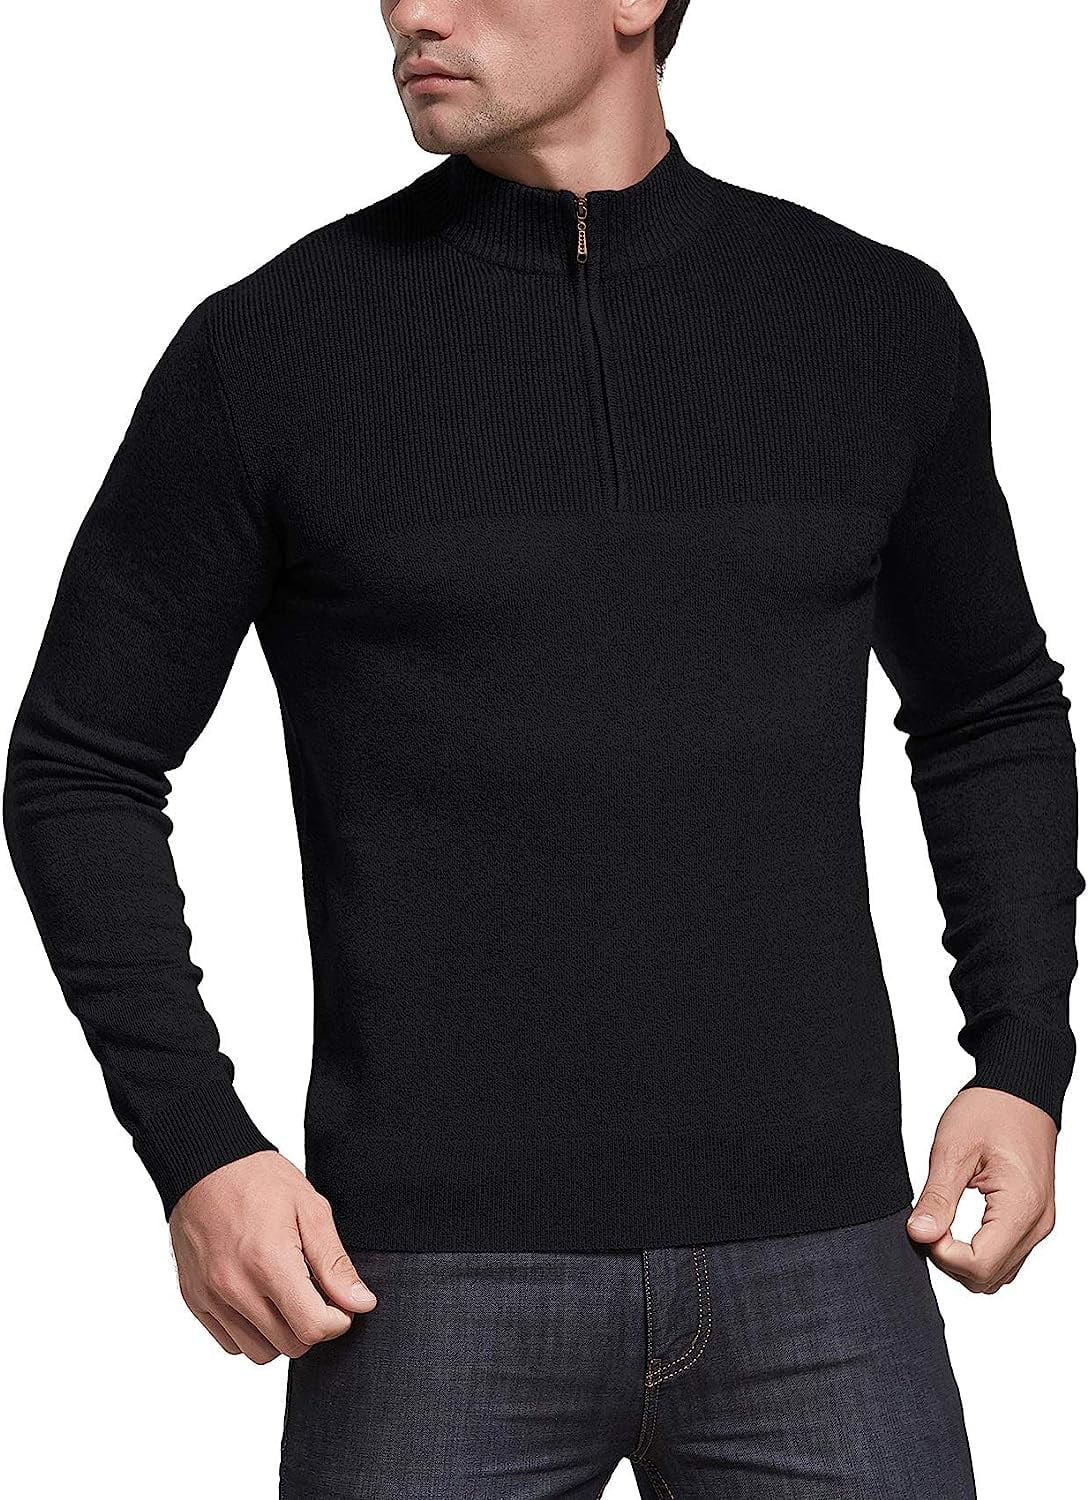 Iceglad Mens Slim Fit Zip Up Mock Neck Polo Sweater Casual Long Sleeve Sweater and Pullover Sweaters with Ribbing Edge - image 5 of 7